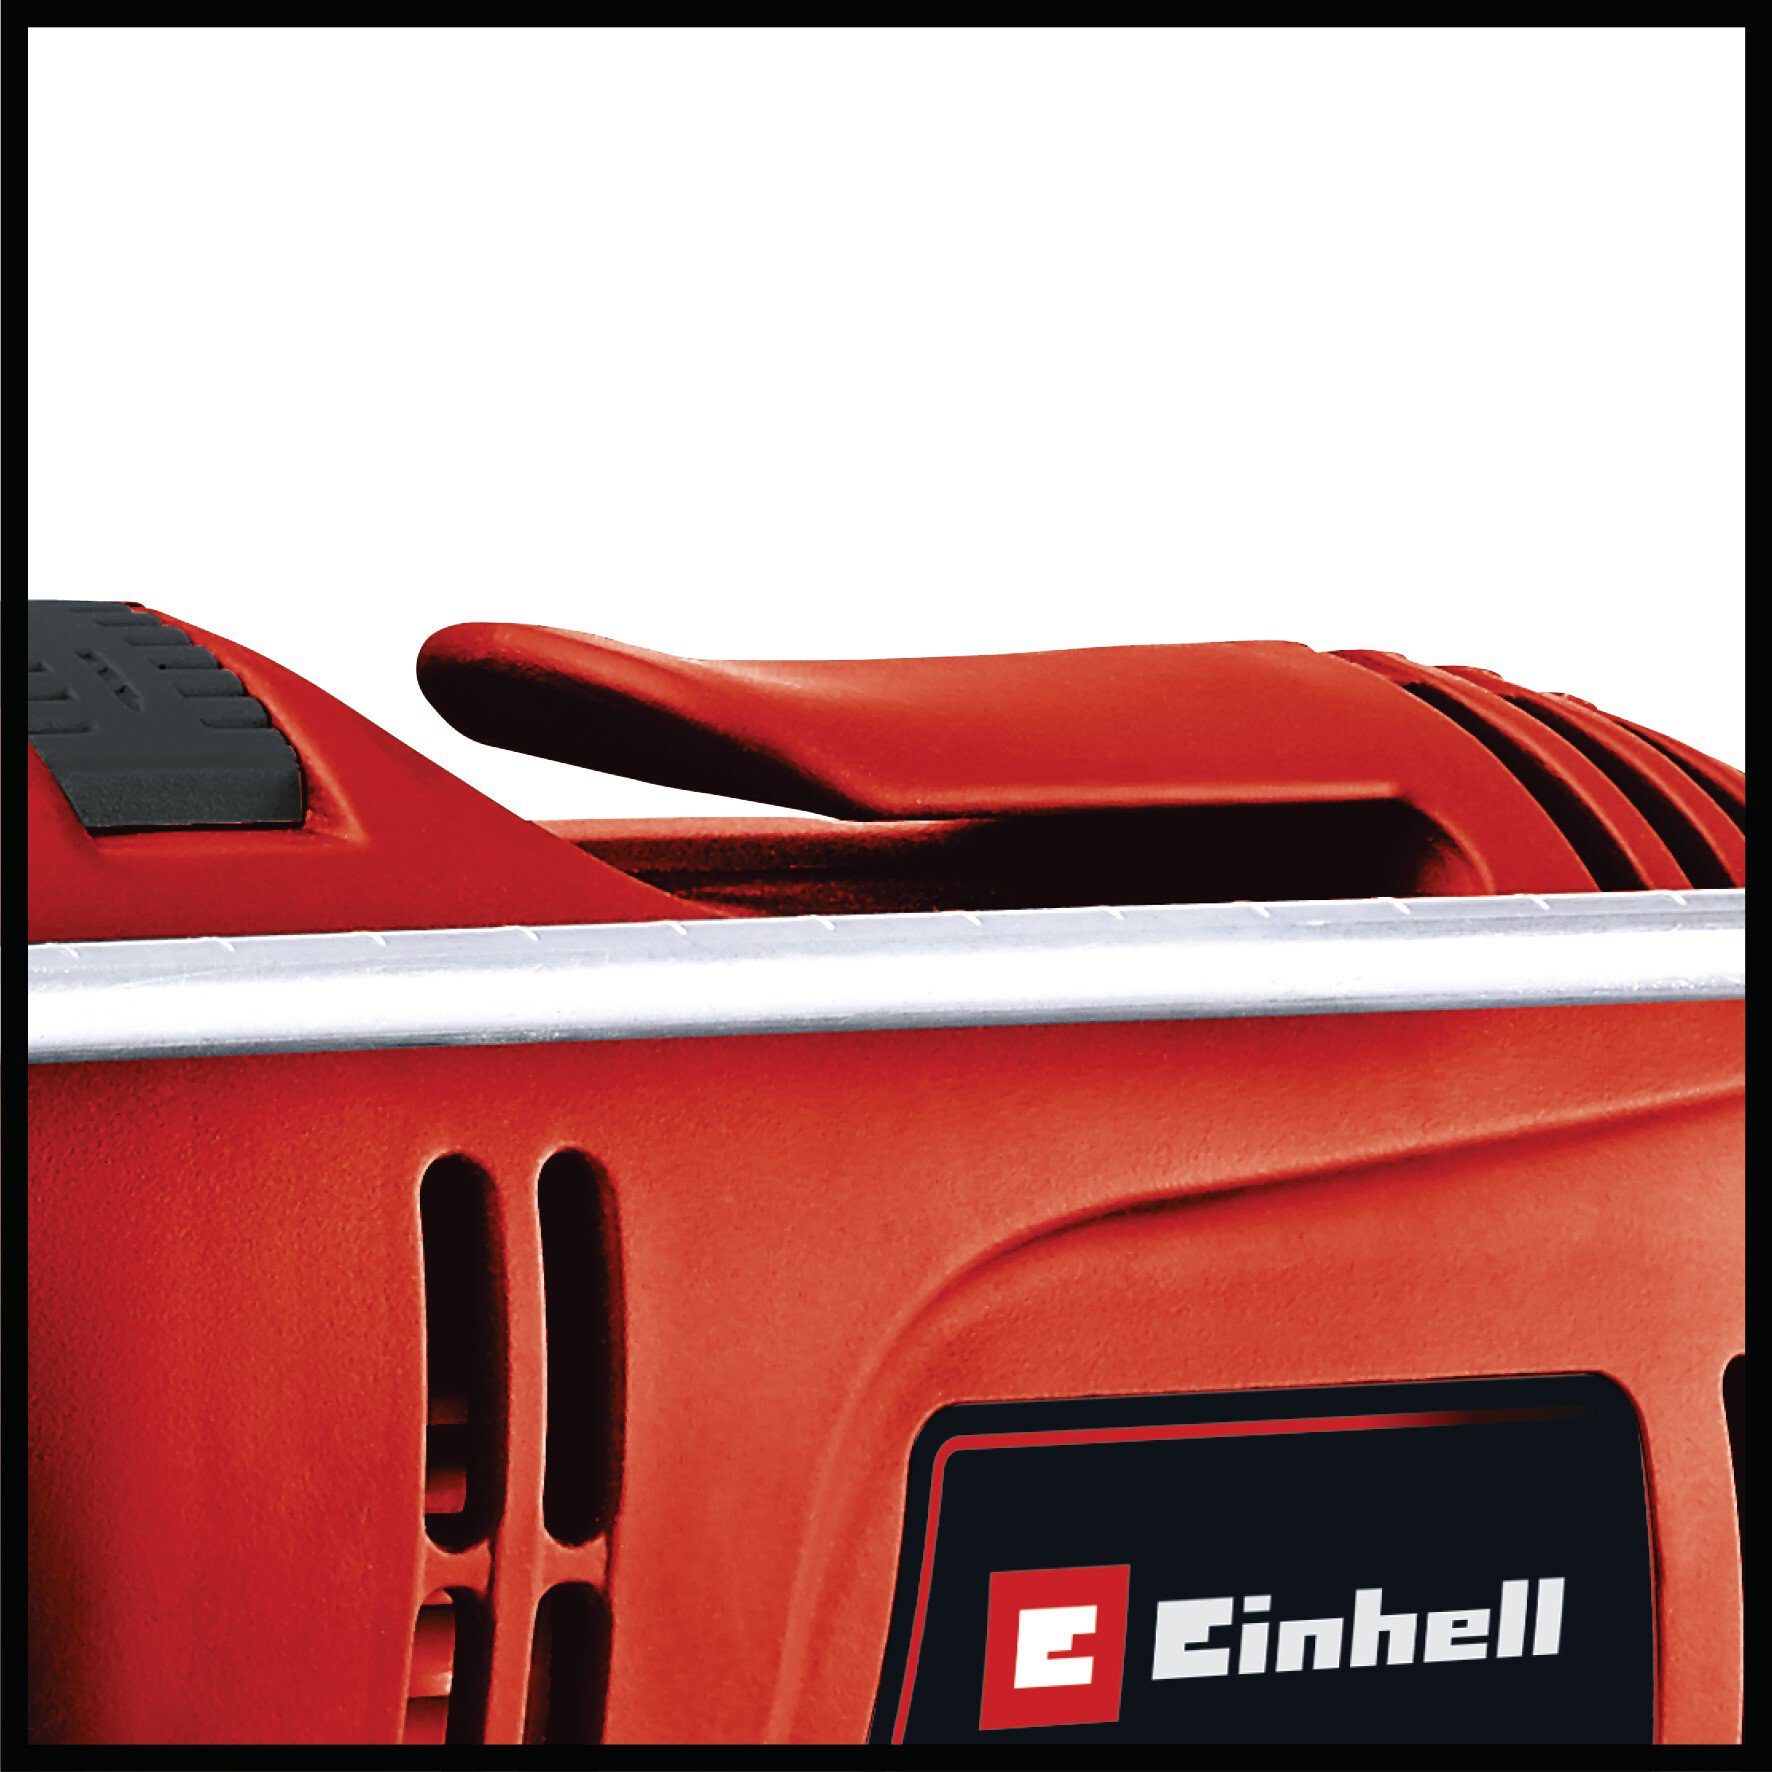 einhell-classic-impact-drill-4258682-detail_image-001